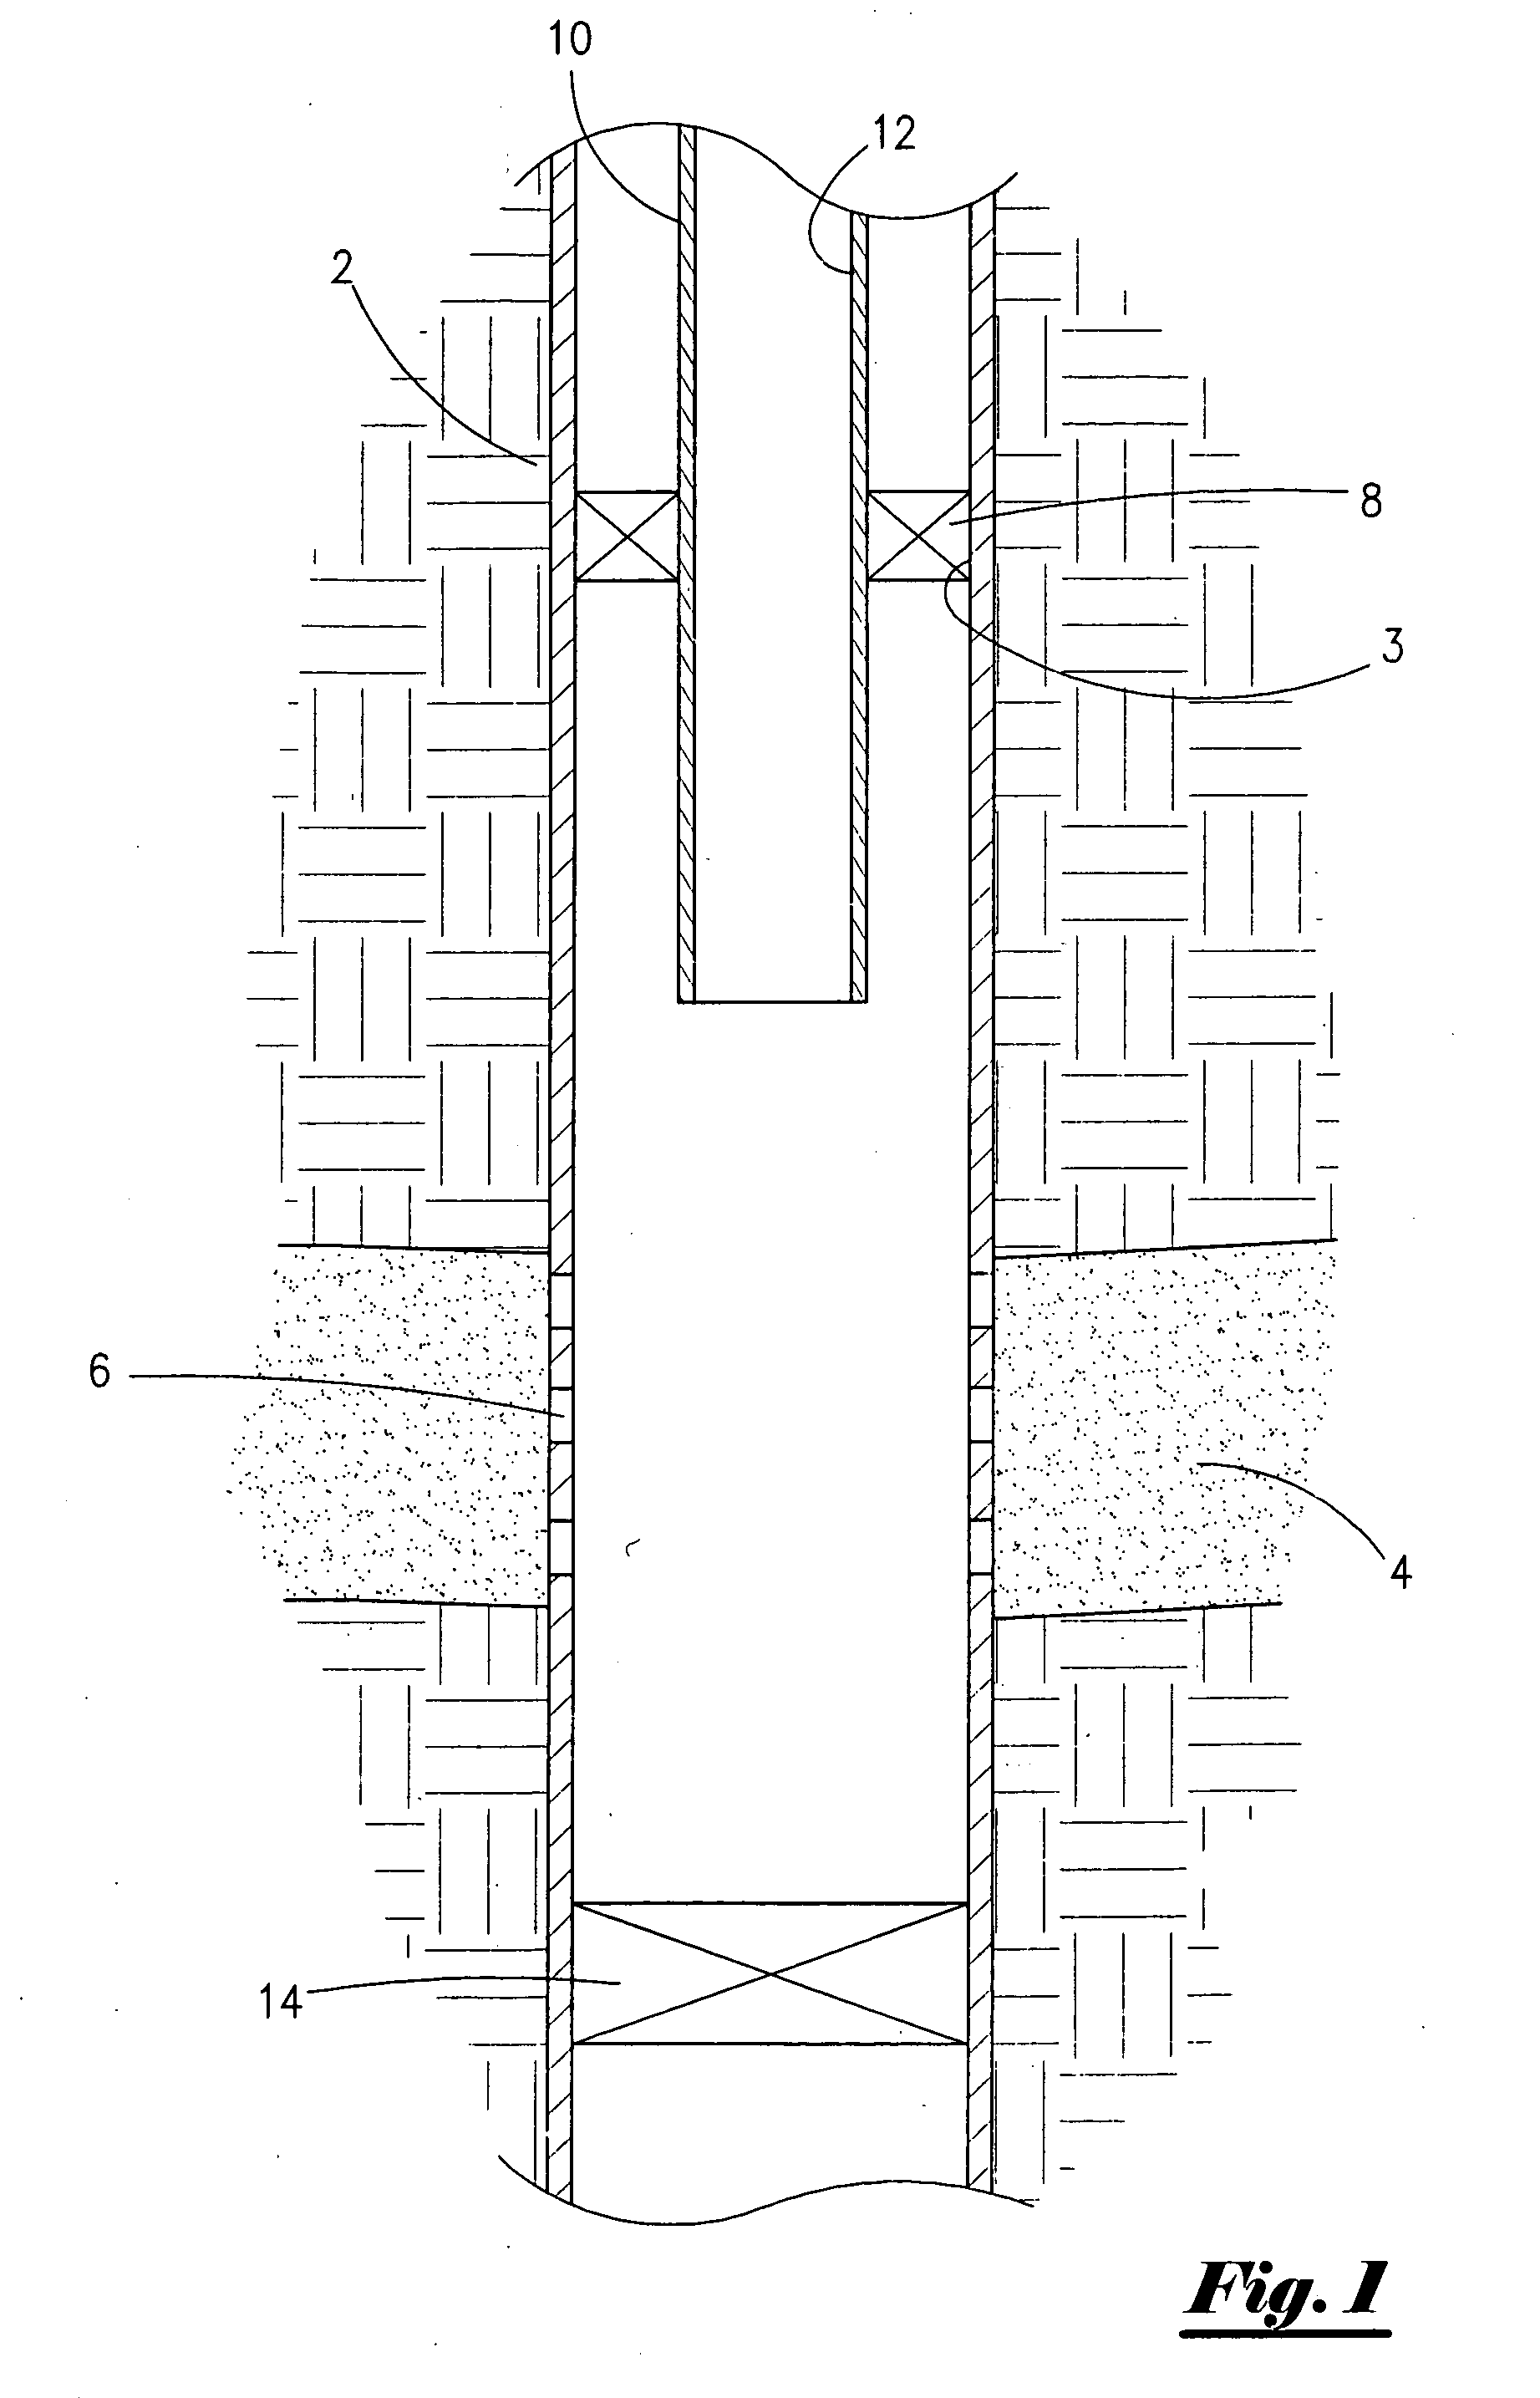 Apparatus and Method for Depositing a Slurry in a Well